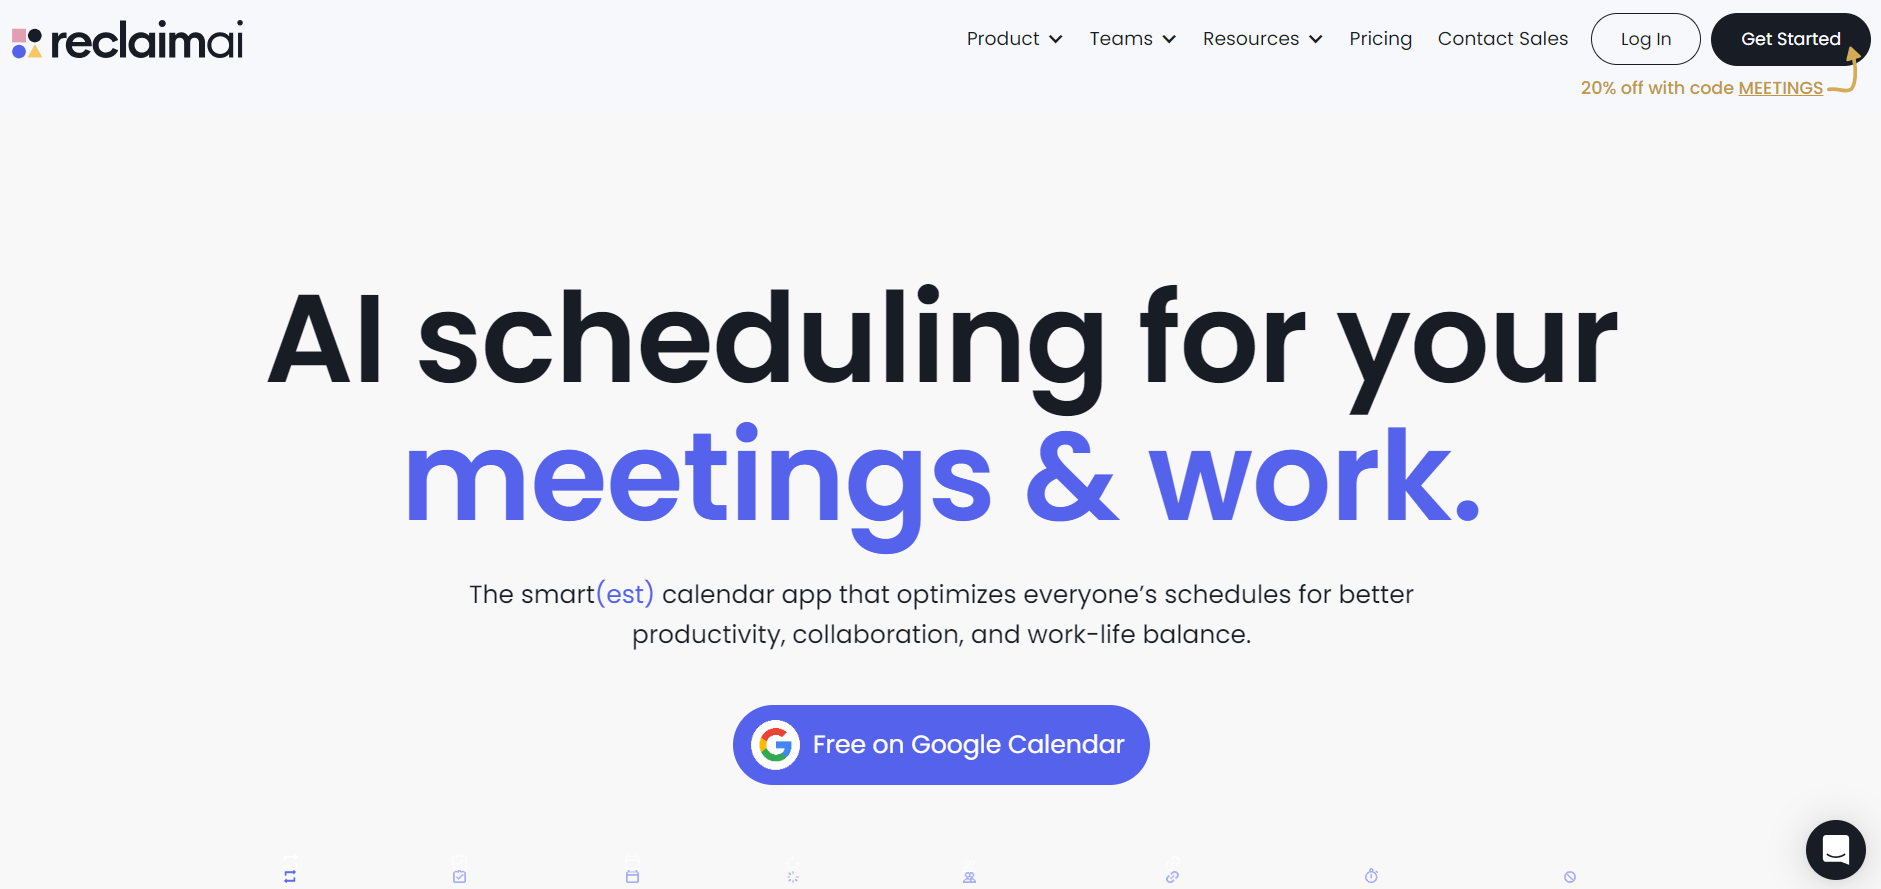 A cover image  of reclaimai website stating AI scheduling for meeting & work.